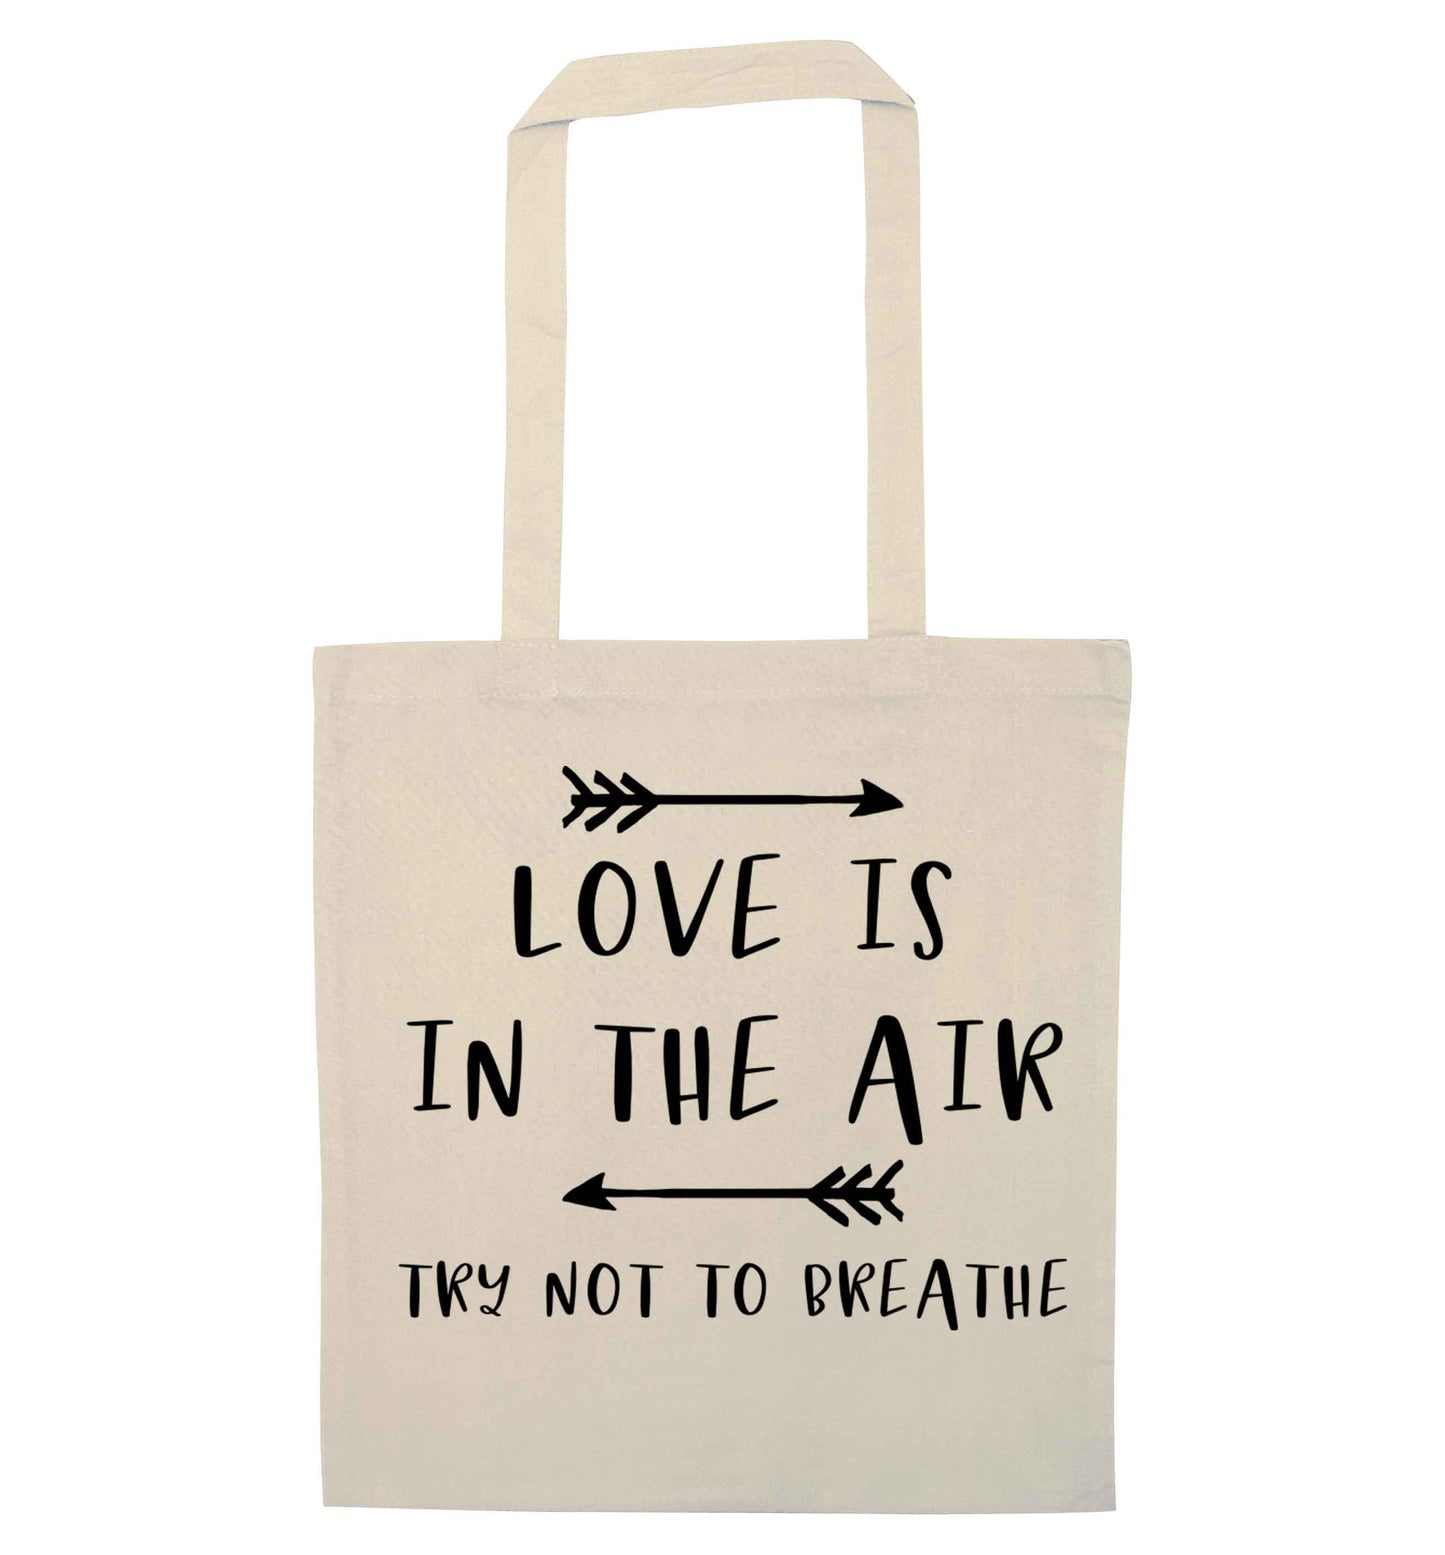 Love is in the air try not to breathe natural tote bag